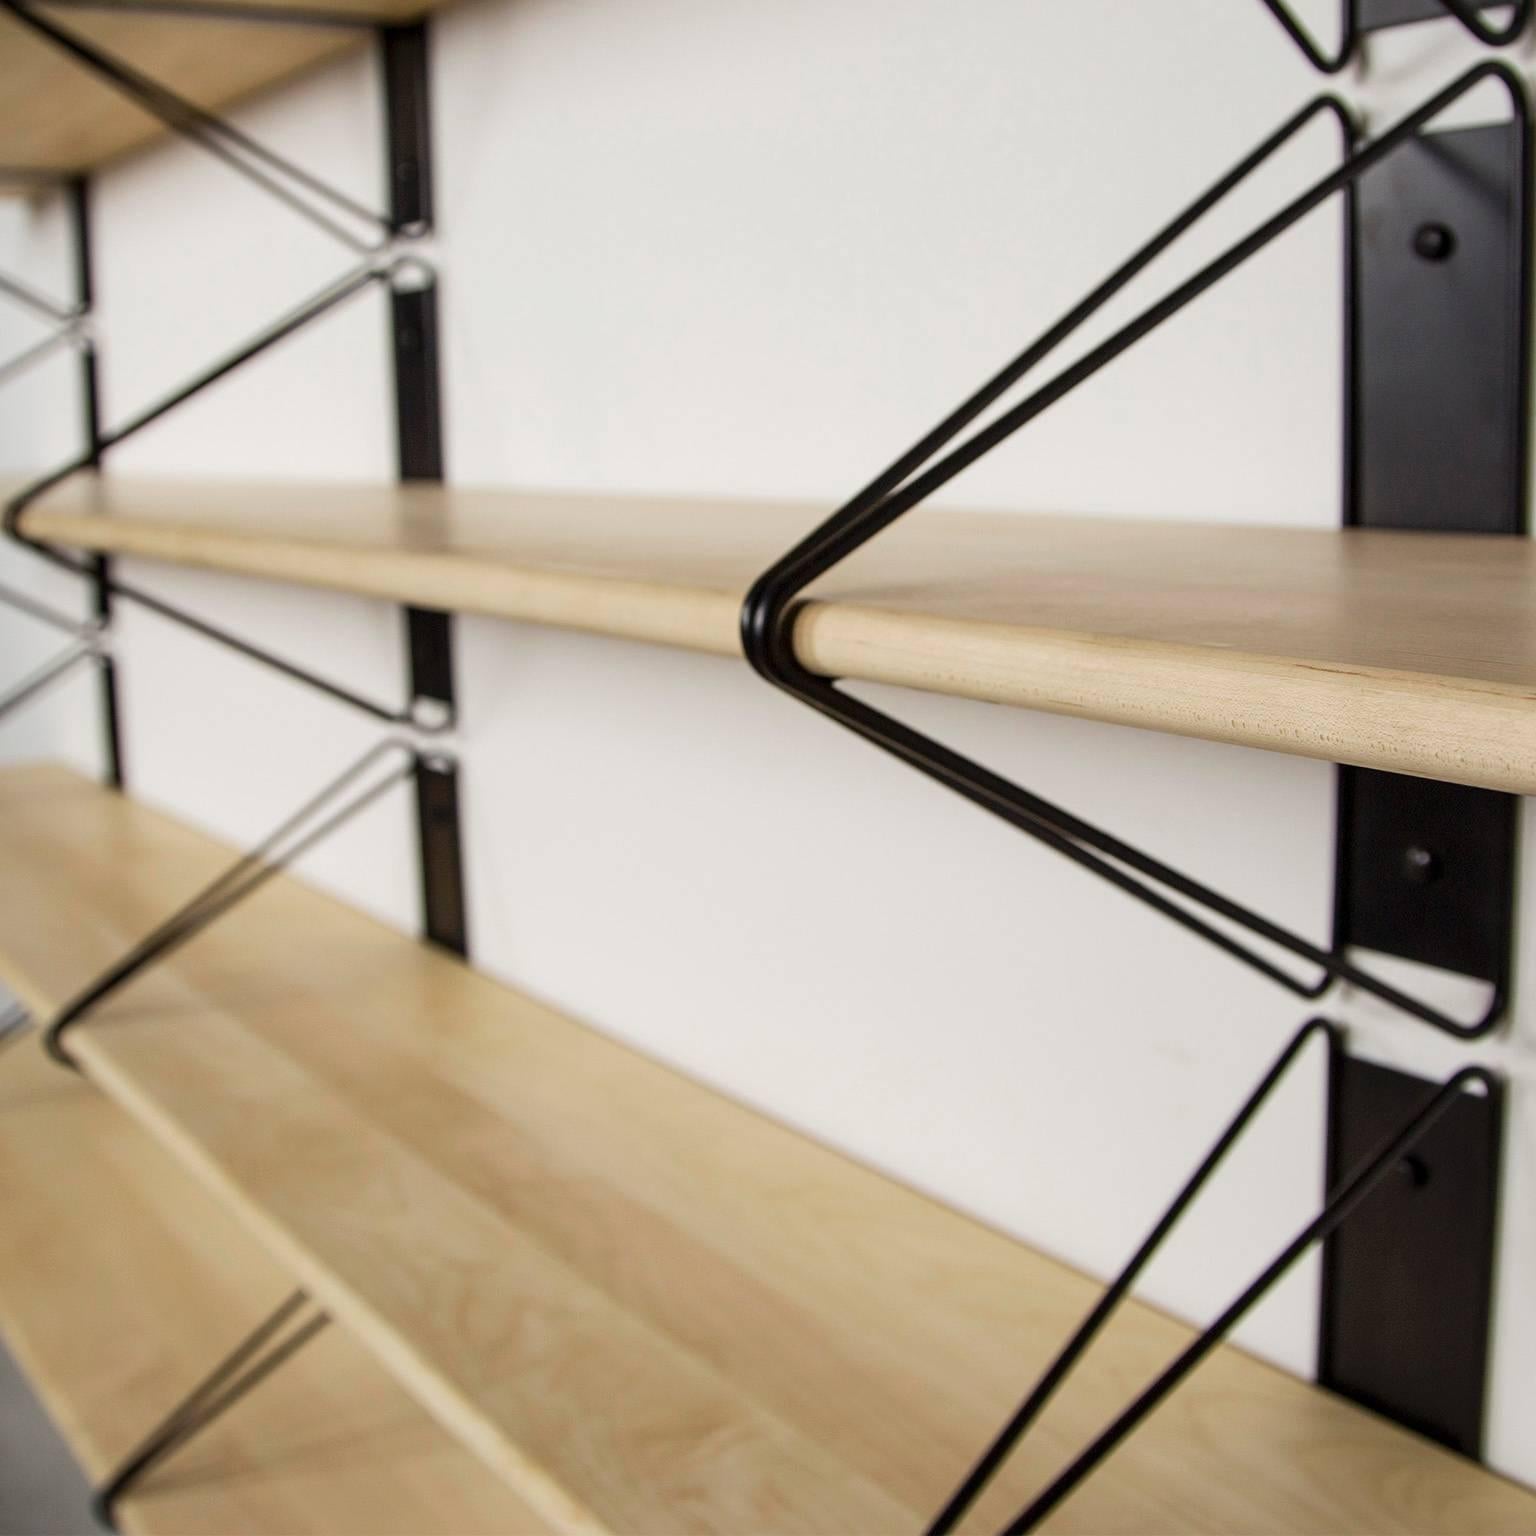 Contemporary Set of 3 Strut Shelves from Souda, Black and Maple, Made to Order For Sale